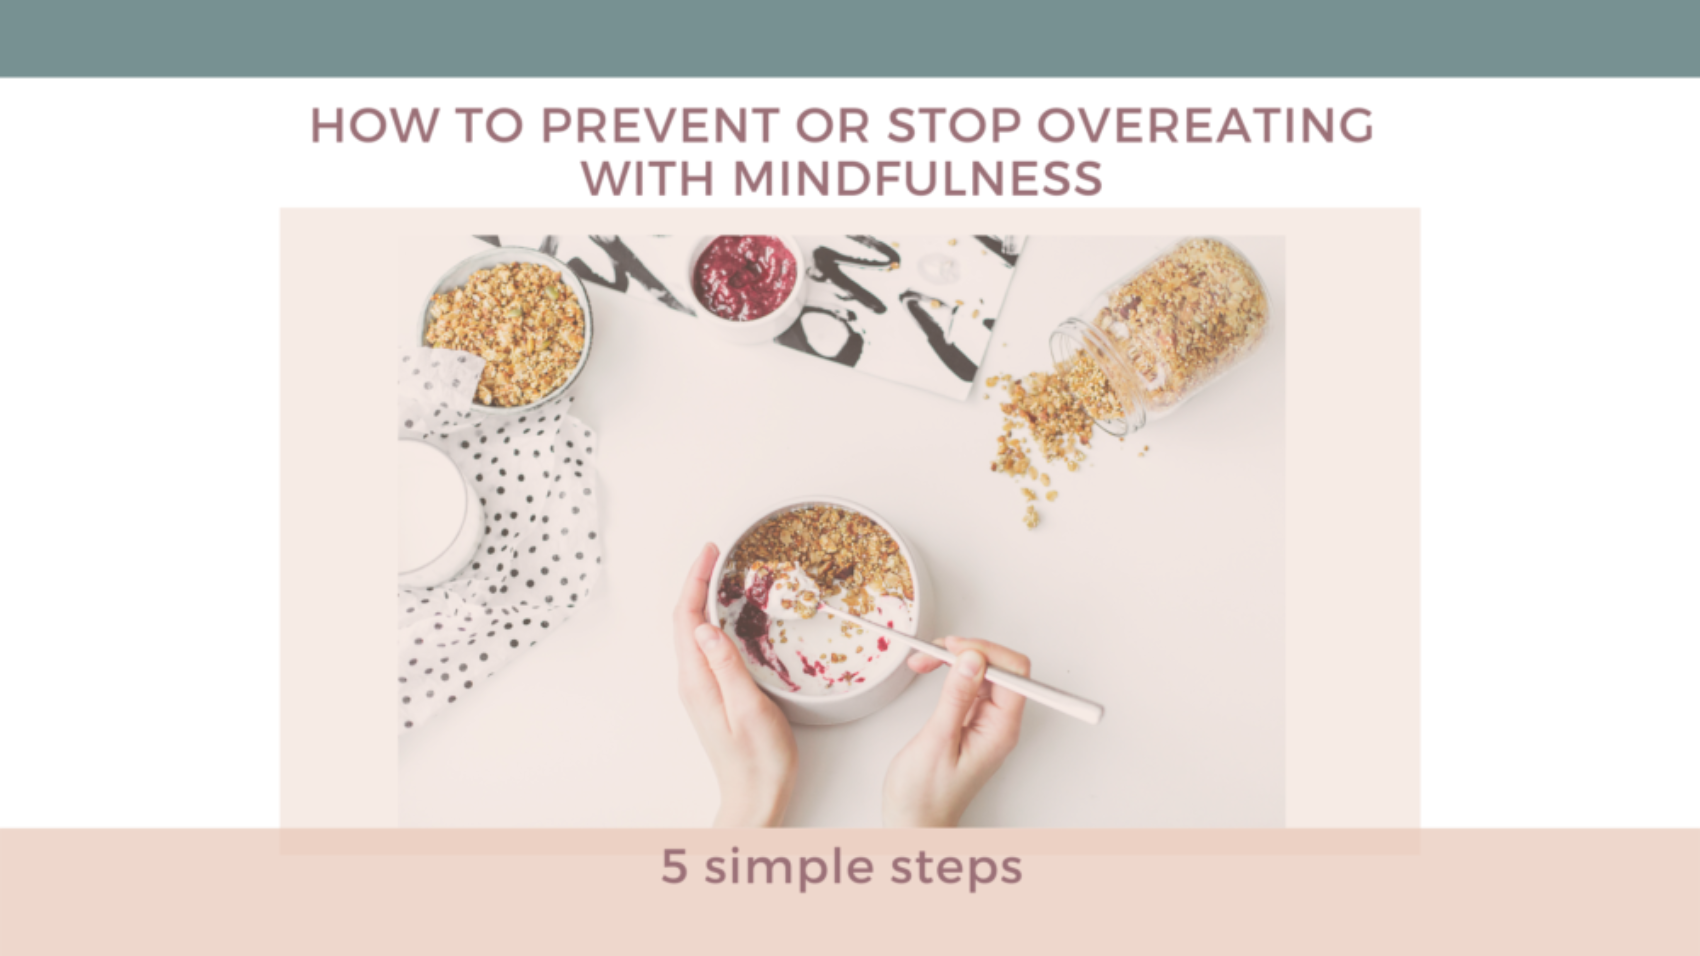 how to sop overeatinh with mindfulness